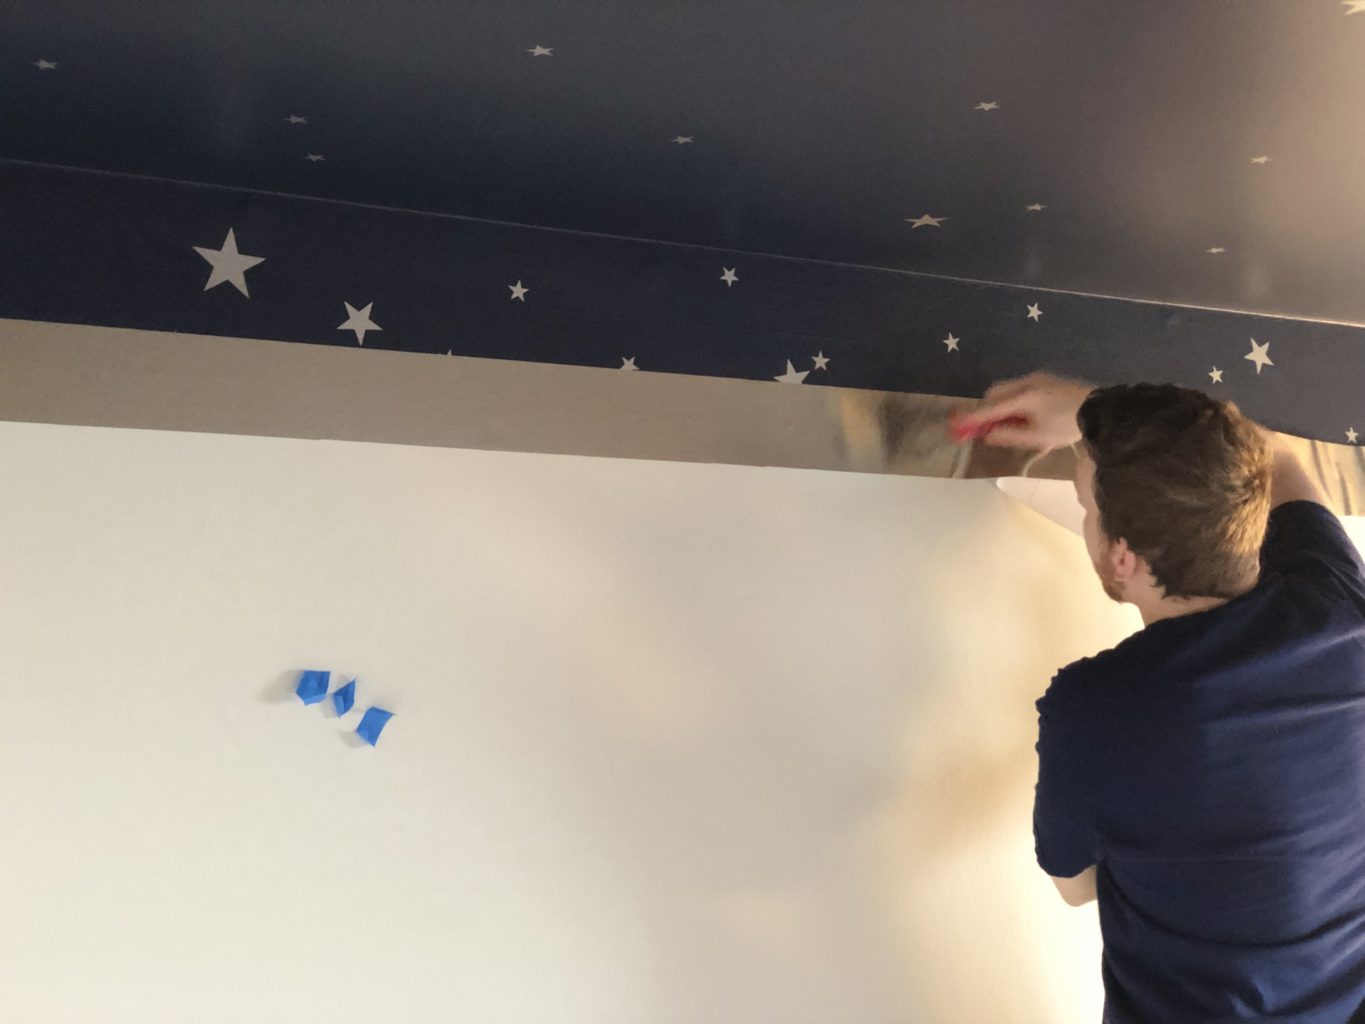 Outer Space Star Wars Inspired Kids' Bedroom: Wall and Celing DIY Tutorial #kidsroomdecor #diydecor #starwars